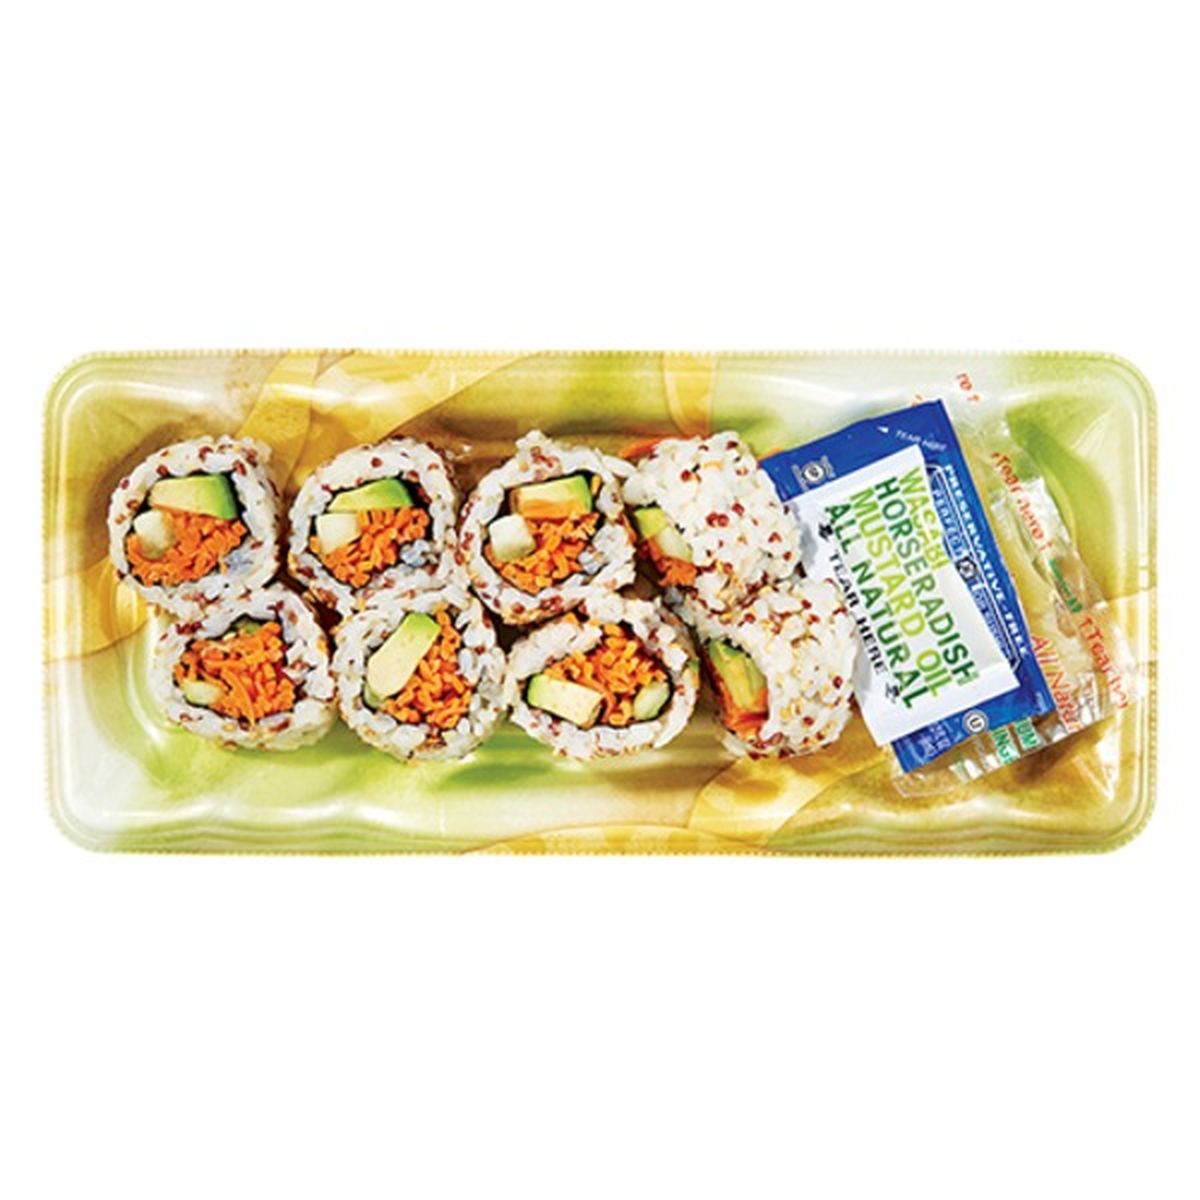 Calories in Wegmans Vegetable Roll with Quinoa Brown Rice (Vegetable)